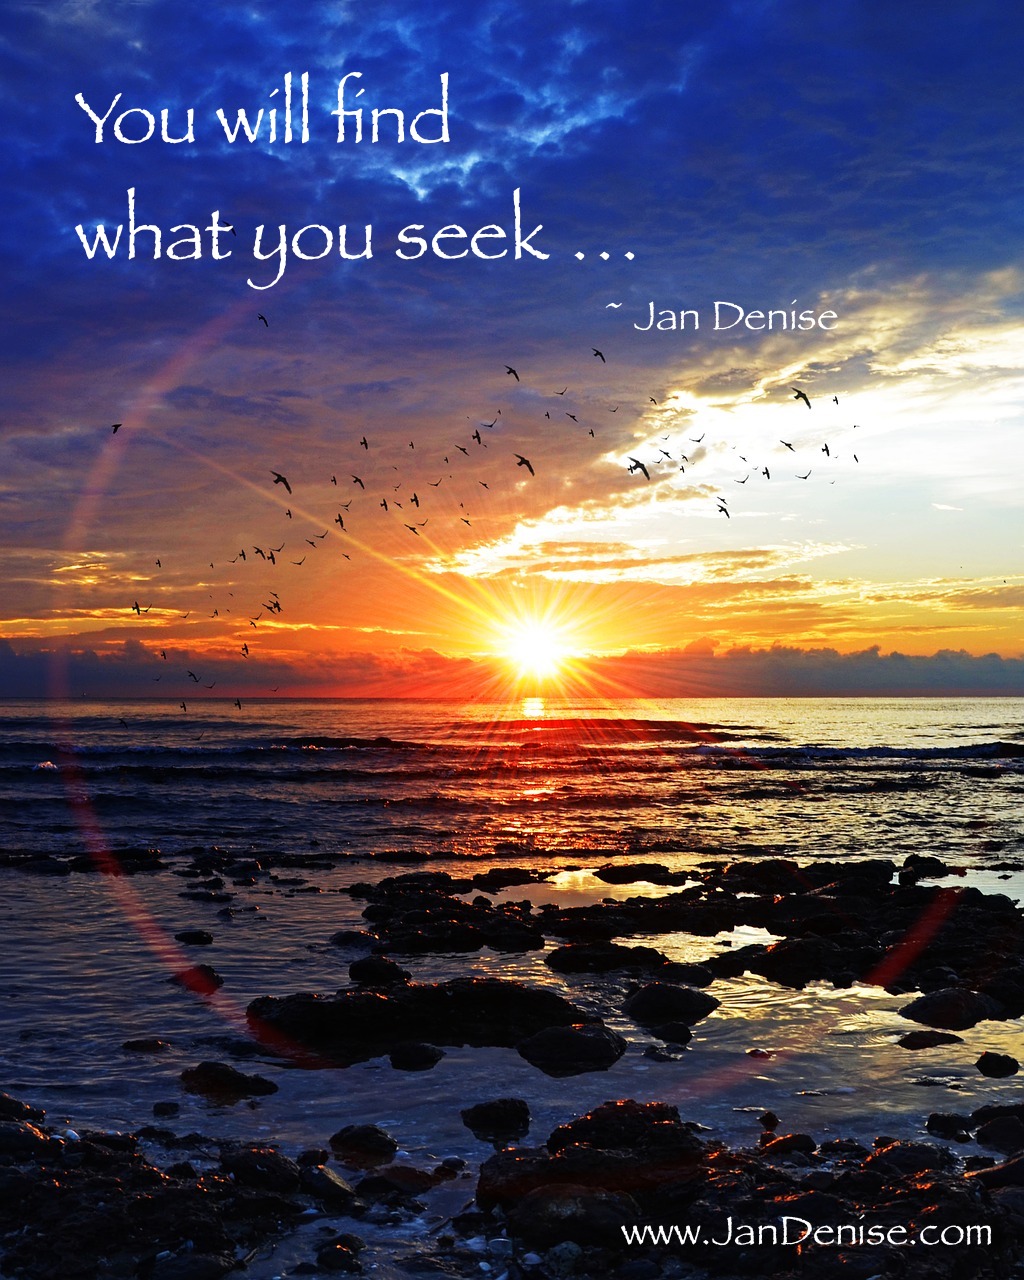 When you seek it within …